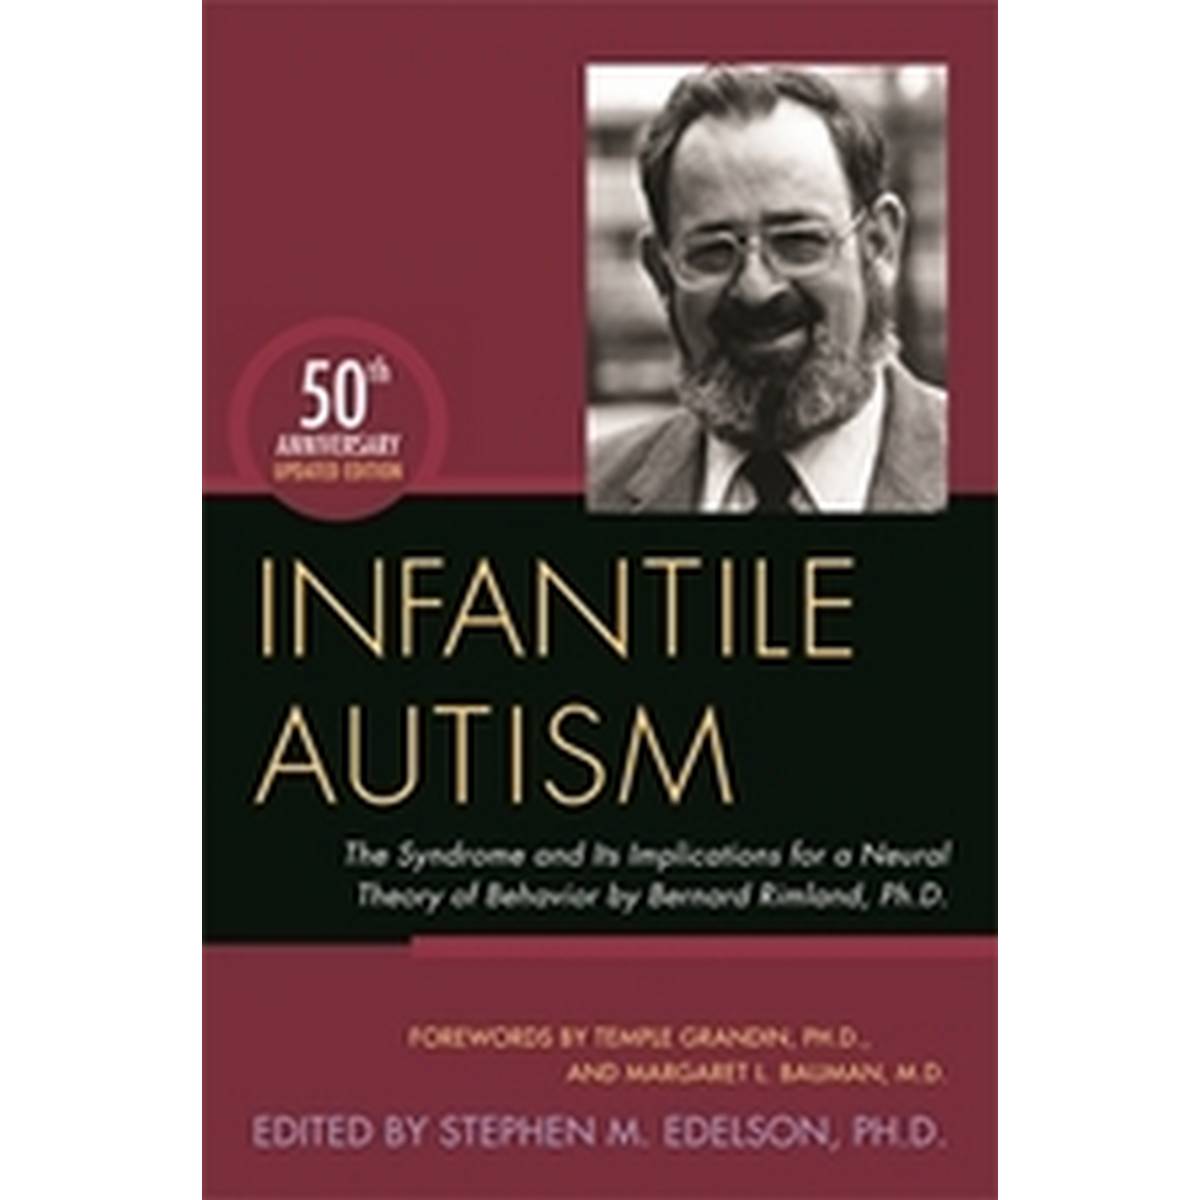 Infantile Autism: The Syndrome and Its Implications for a Neural Theory of Behavior